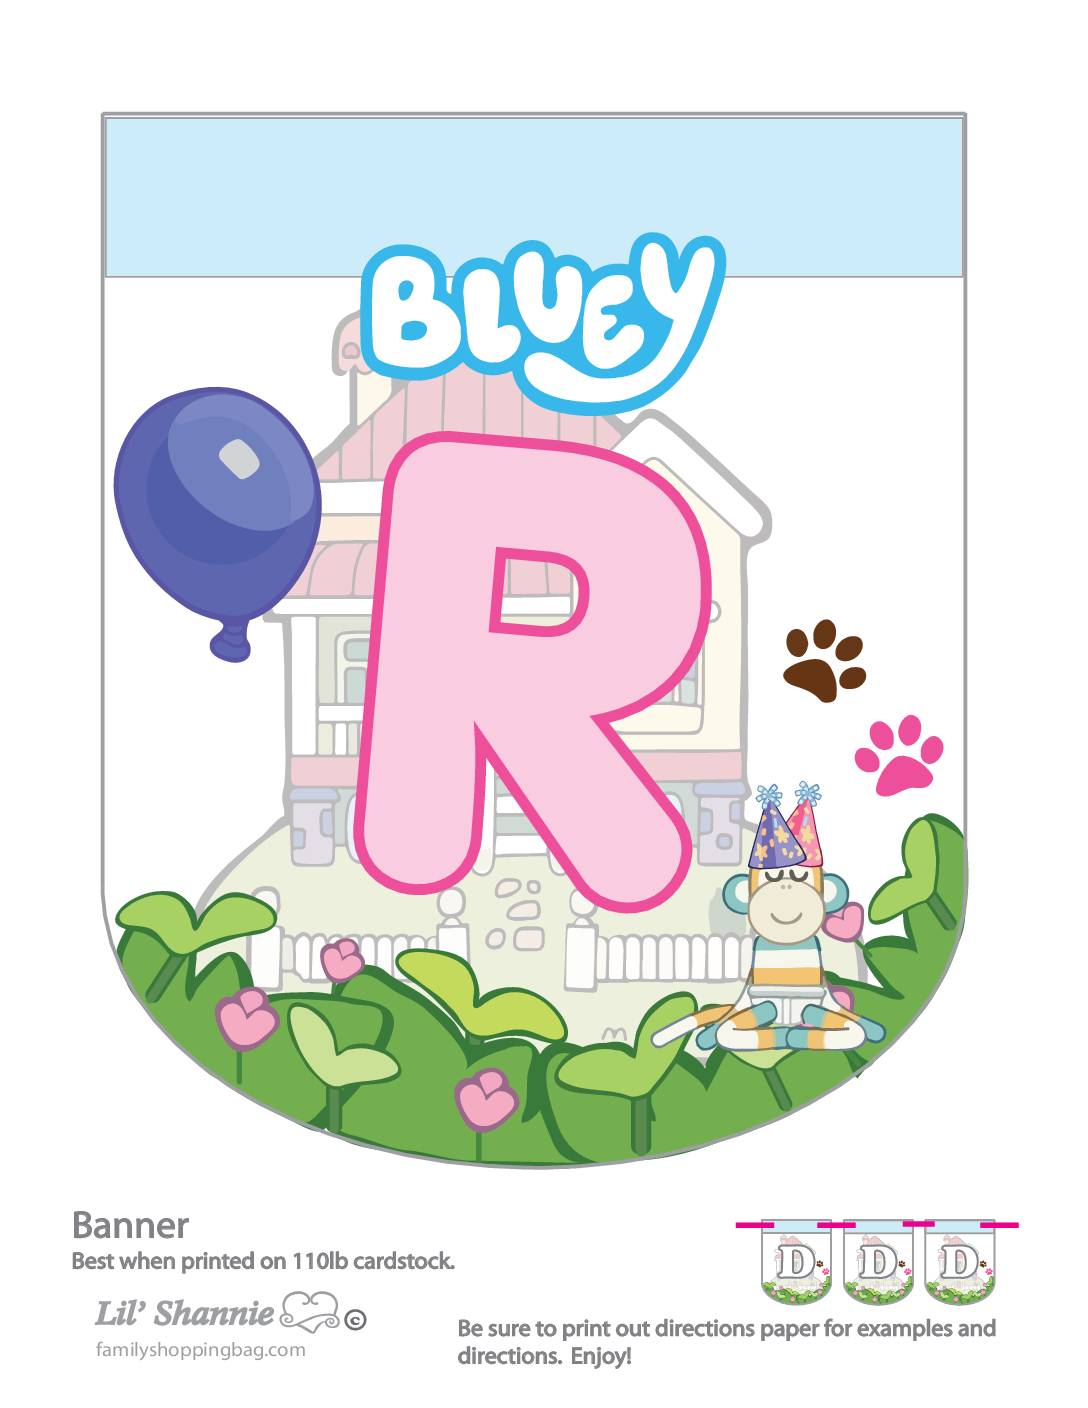 Banner R Bluey Party Banners